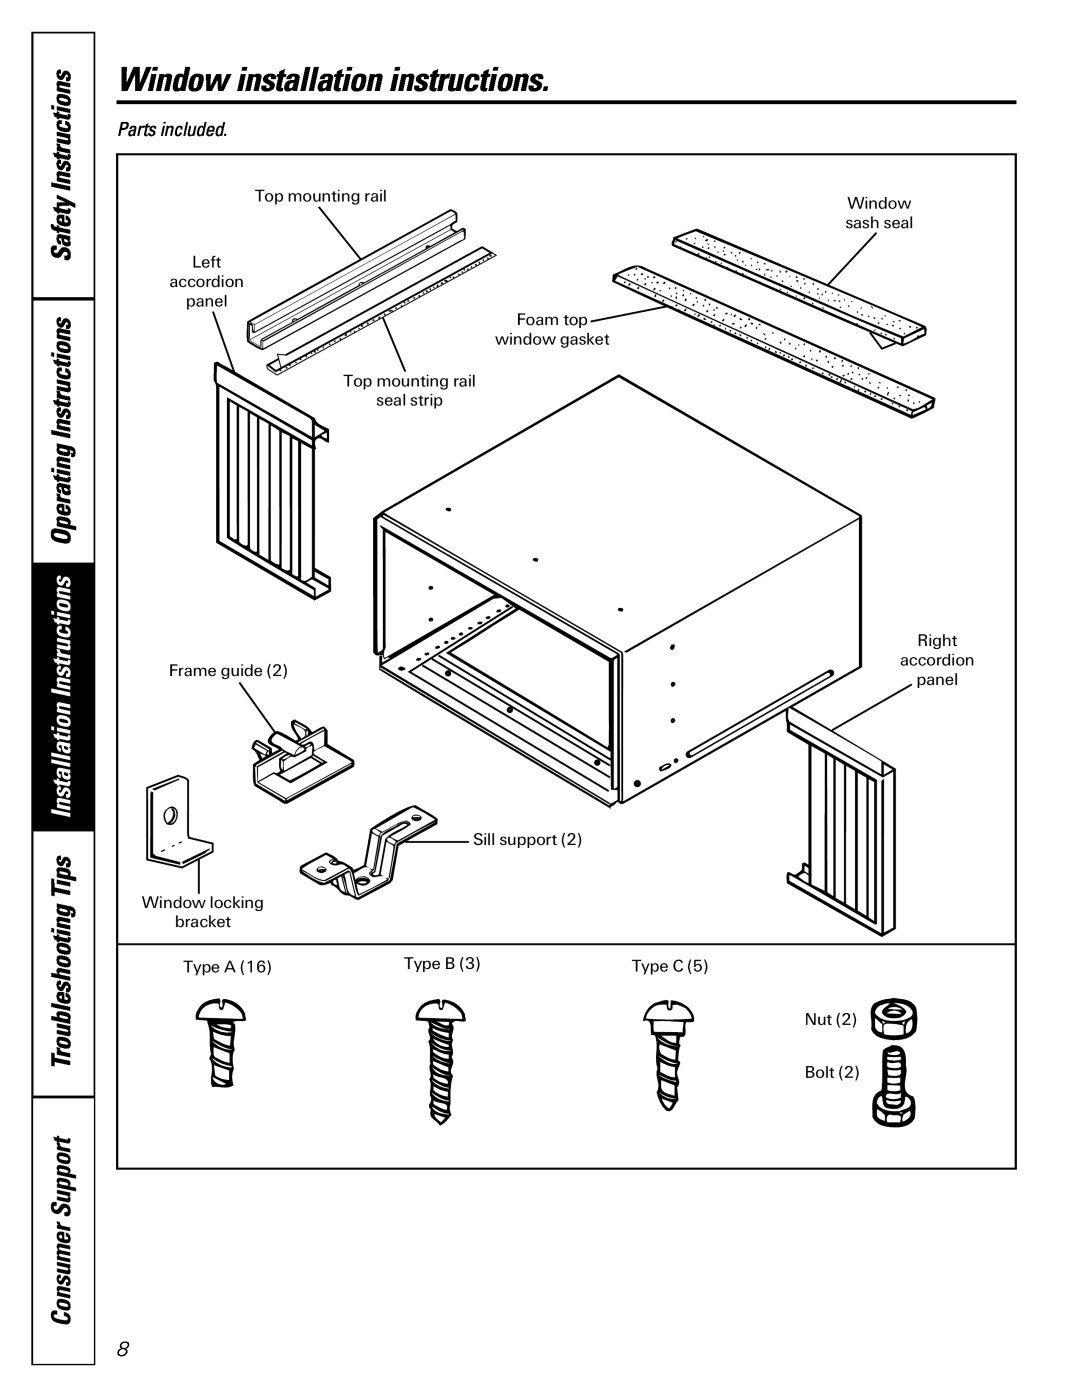 GE AGE12 operating instructions Window installation instructions, Parts included 